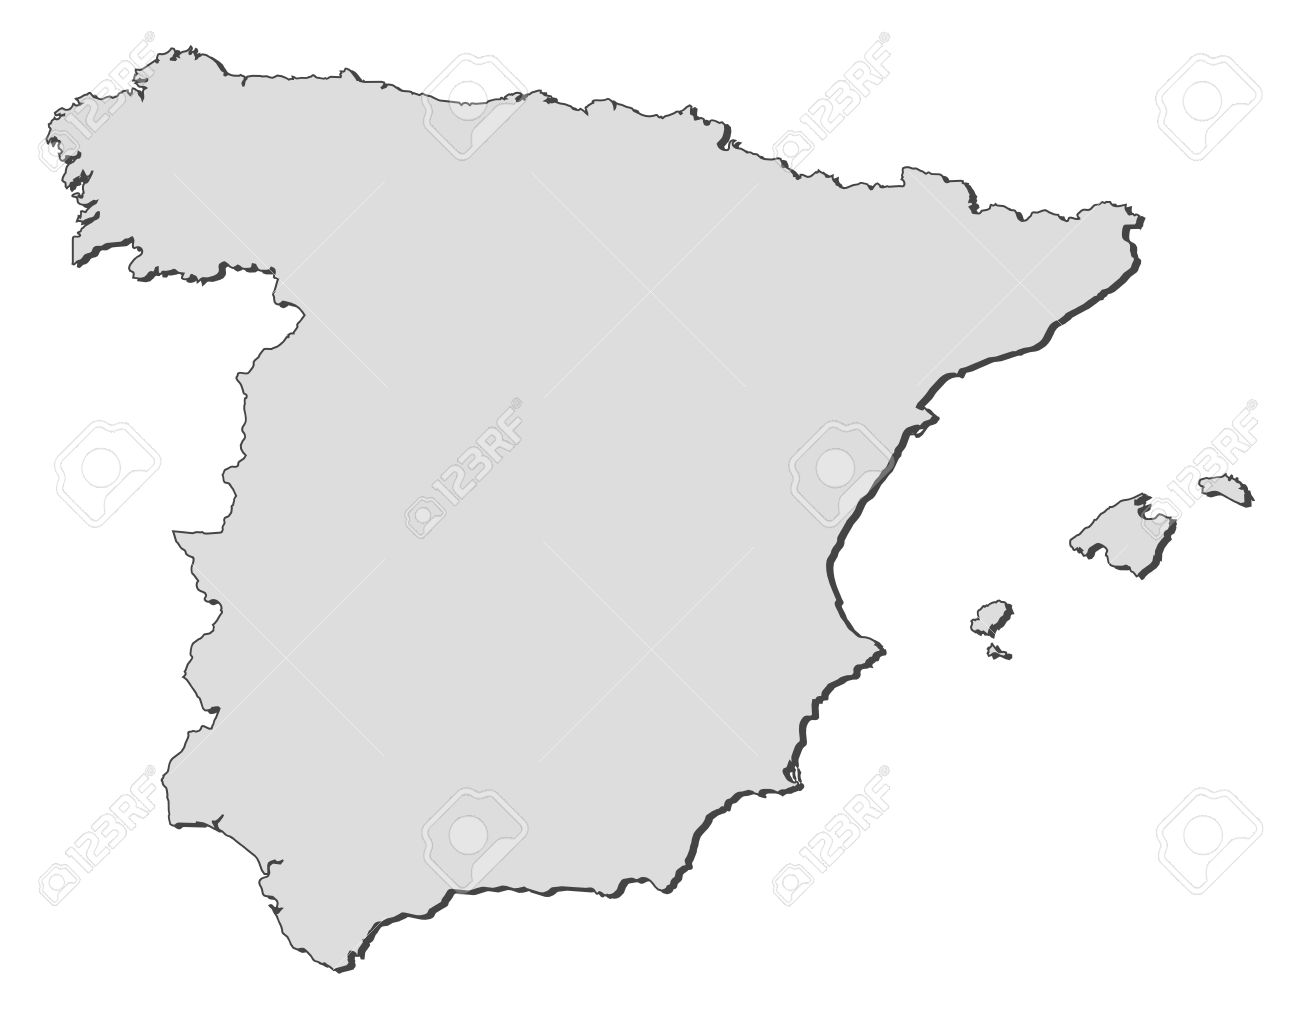 clipart map of spain - photo #25